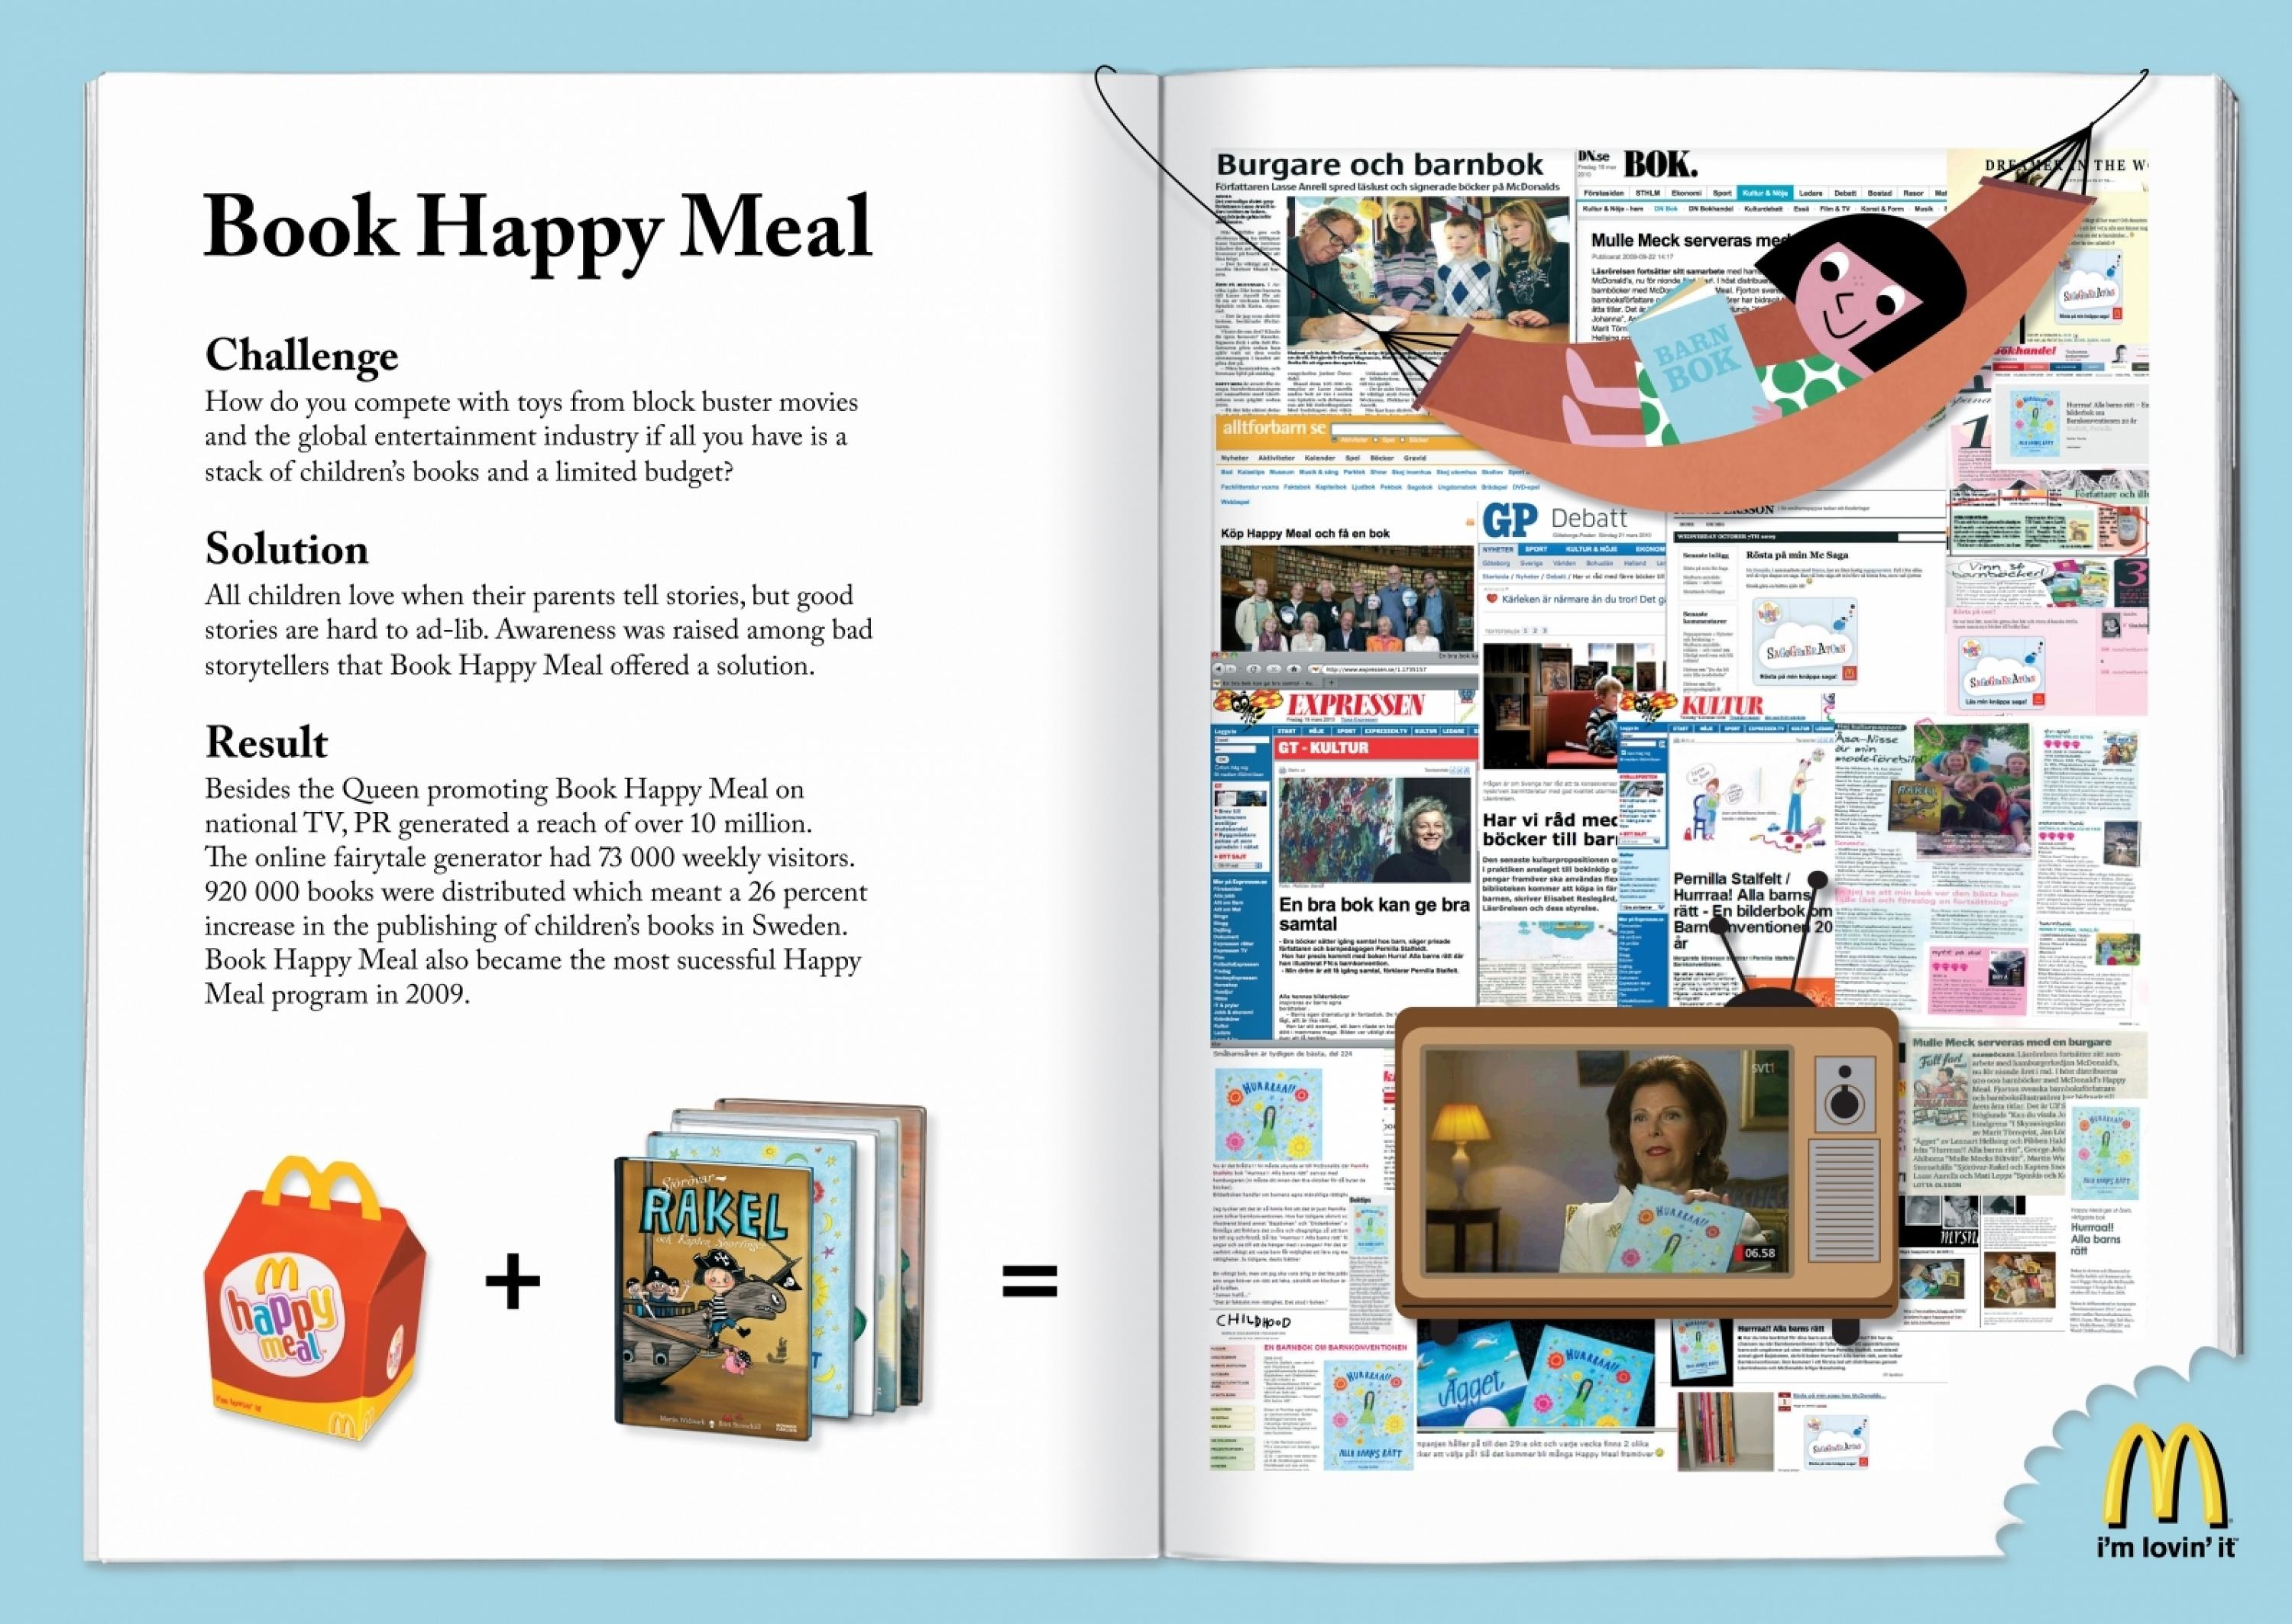 BOOK HAPPY MEAL